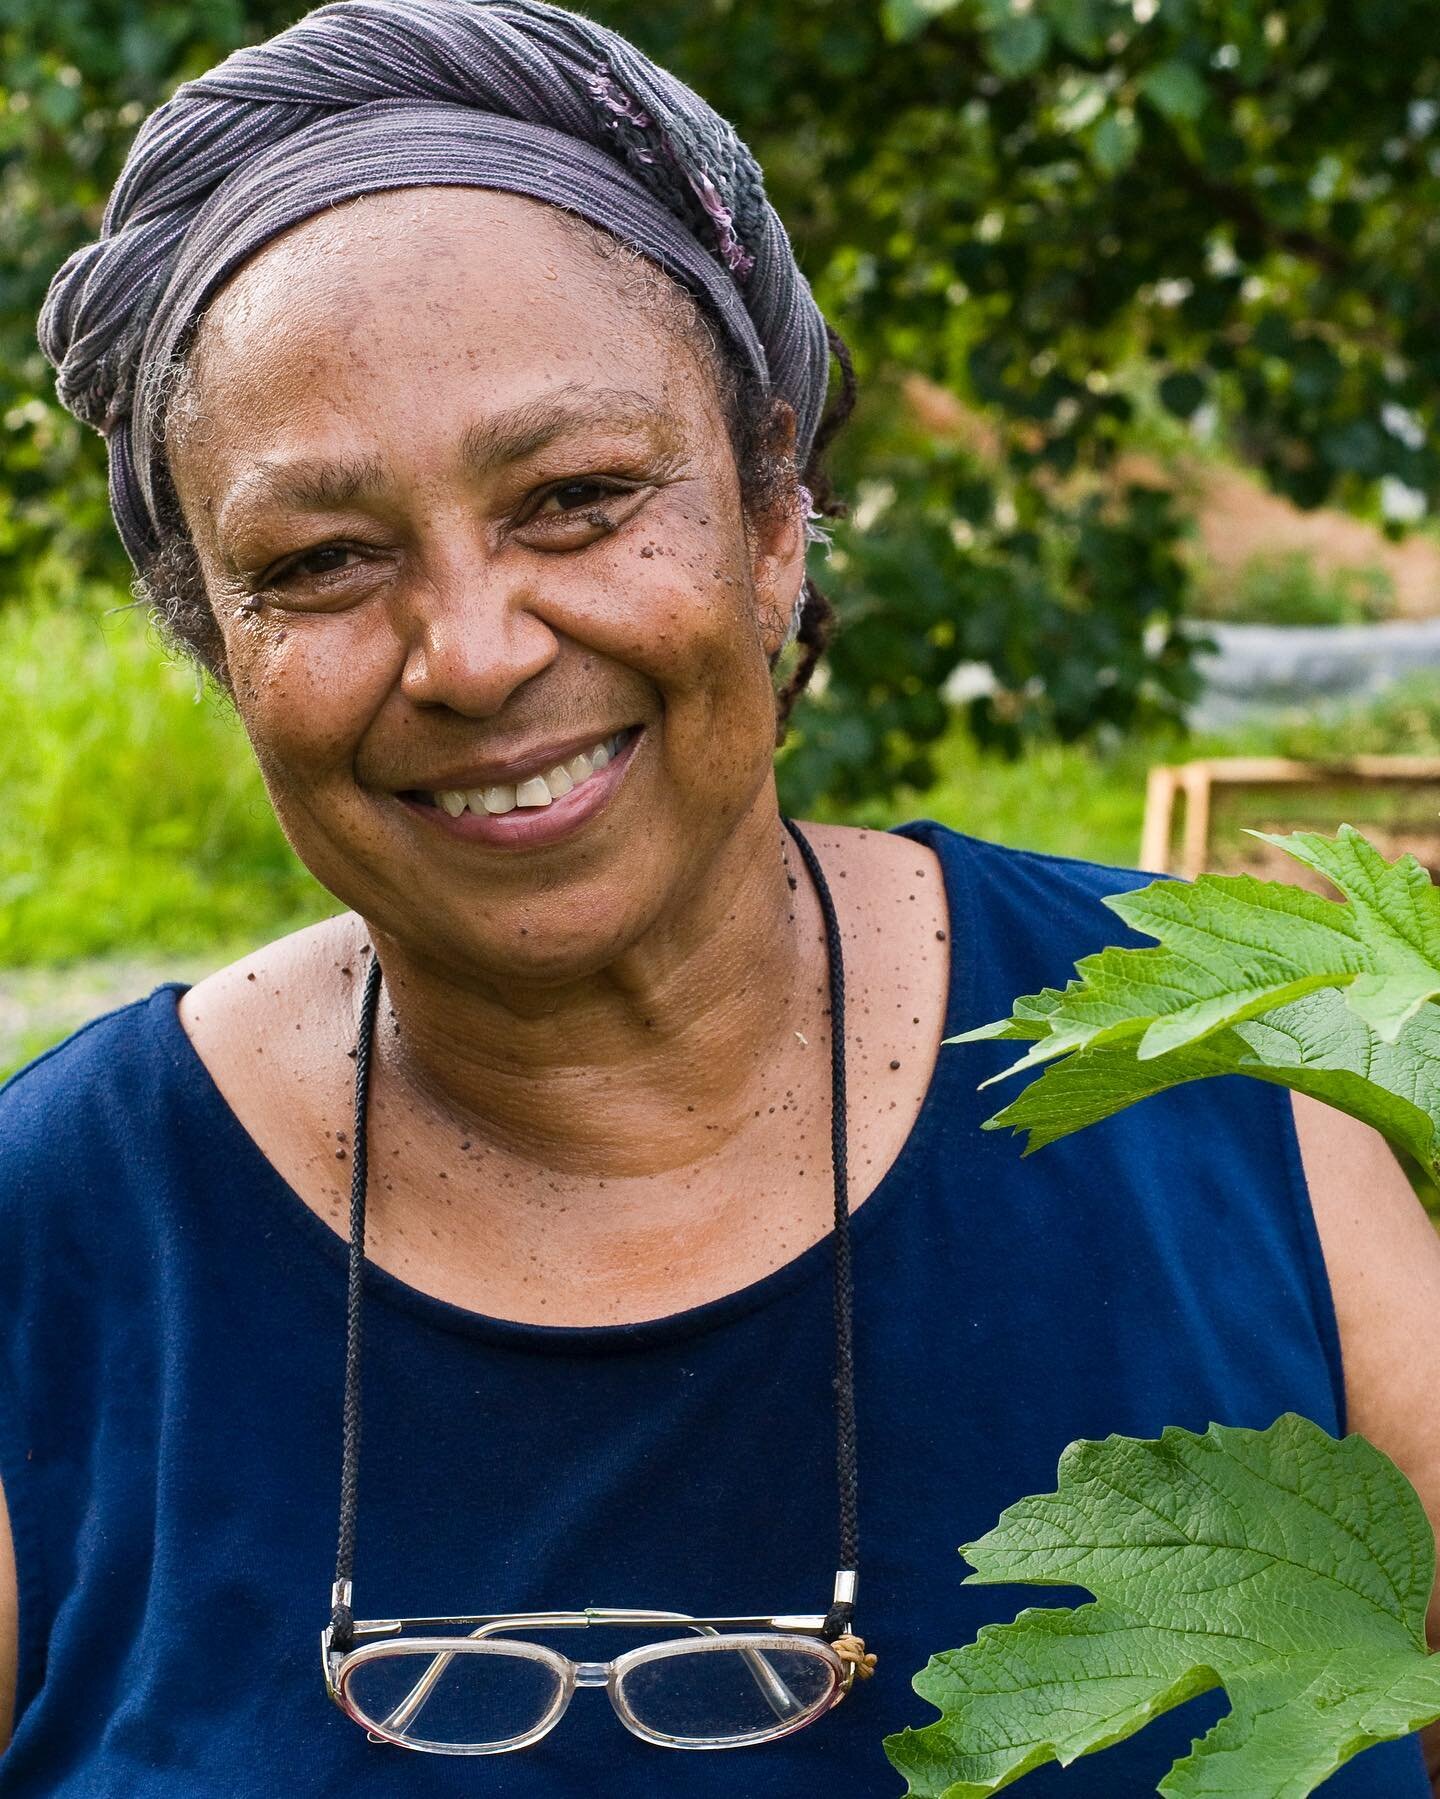 We are excited to announce another speaker for this years Black Farmers Conference! 

Ira Wallace is an organic grower, author, speaker, visionary and worker/owner of the cooperative Southern Exposure Seed Exchange where she coordinates outreach, edu